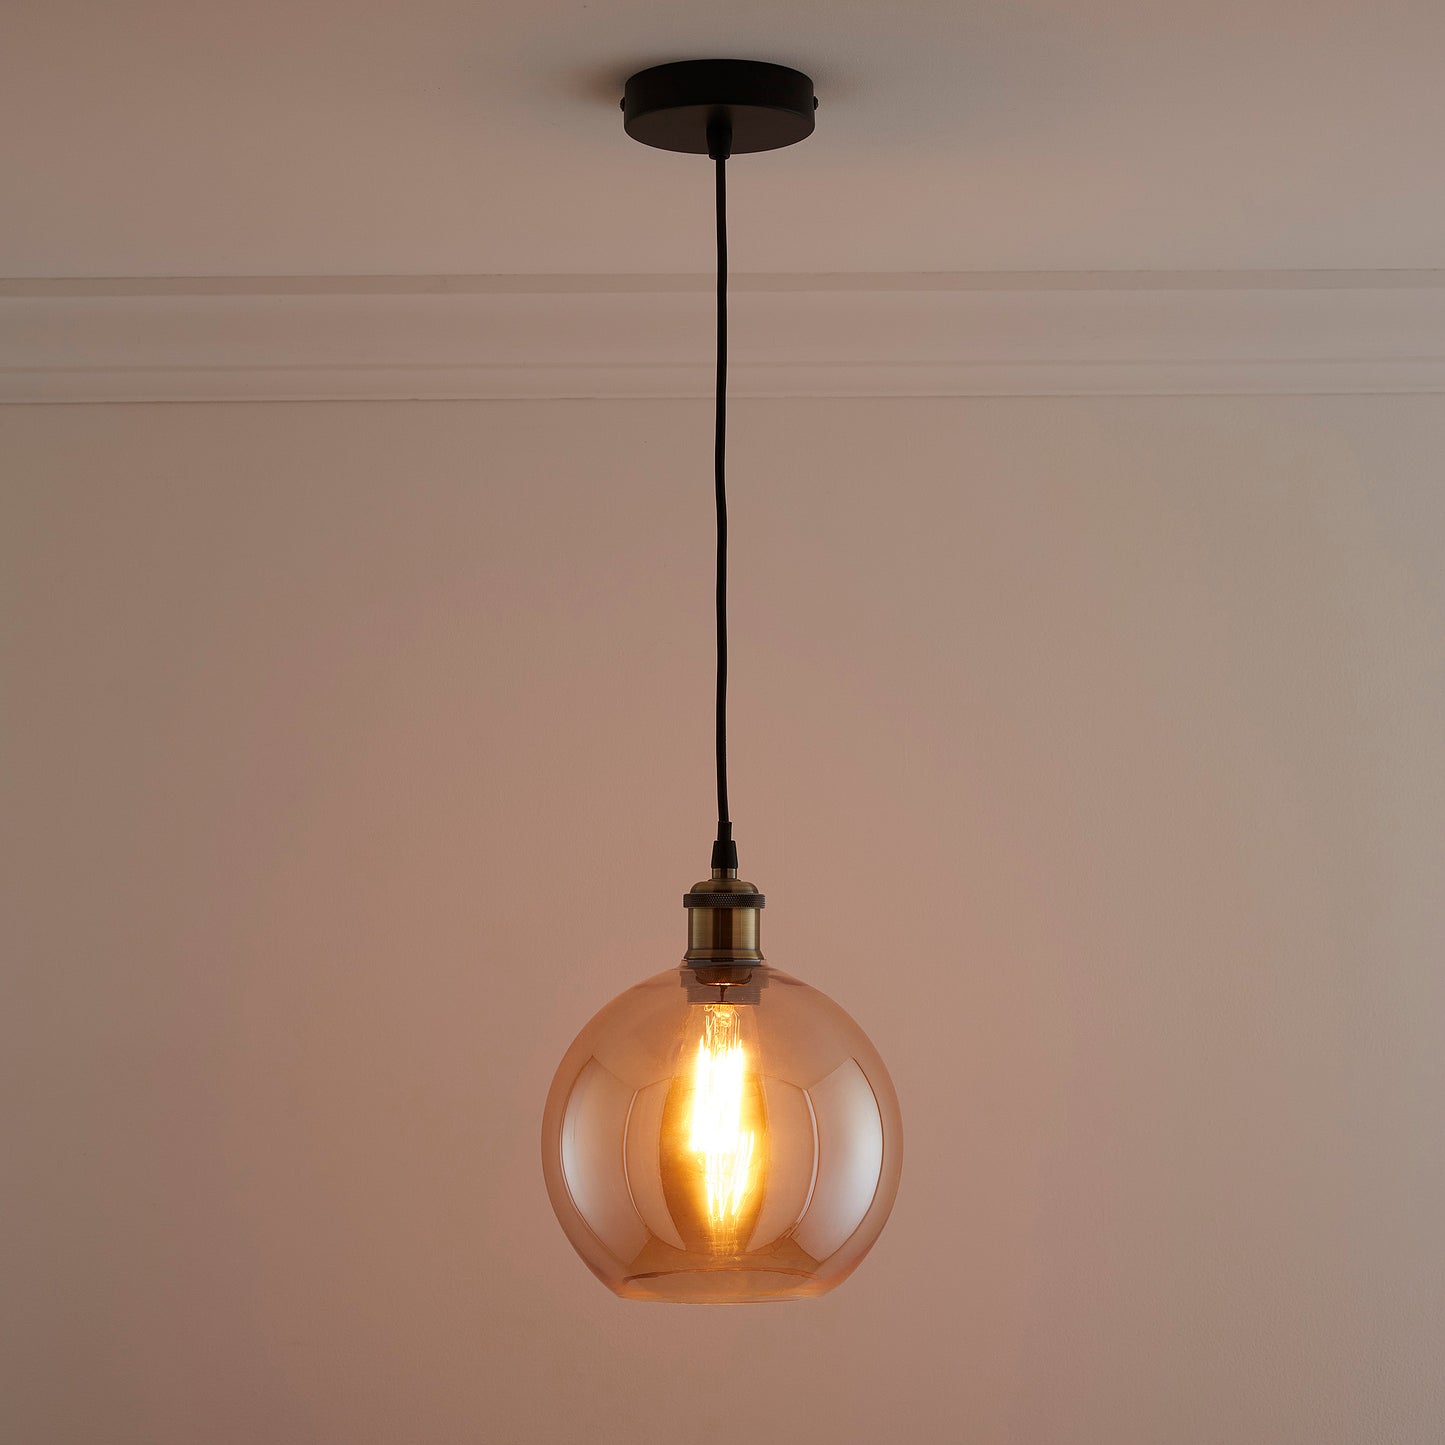 Antonio 1 light Hanging Glass Ceiling Pendant with Filament Bulb 3 Colours Available Amber, Smokey Grey and Clear